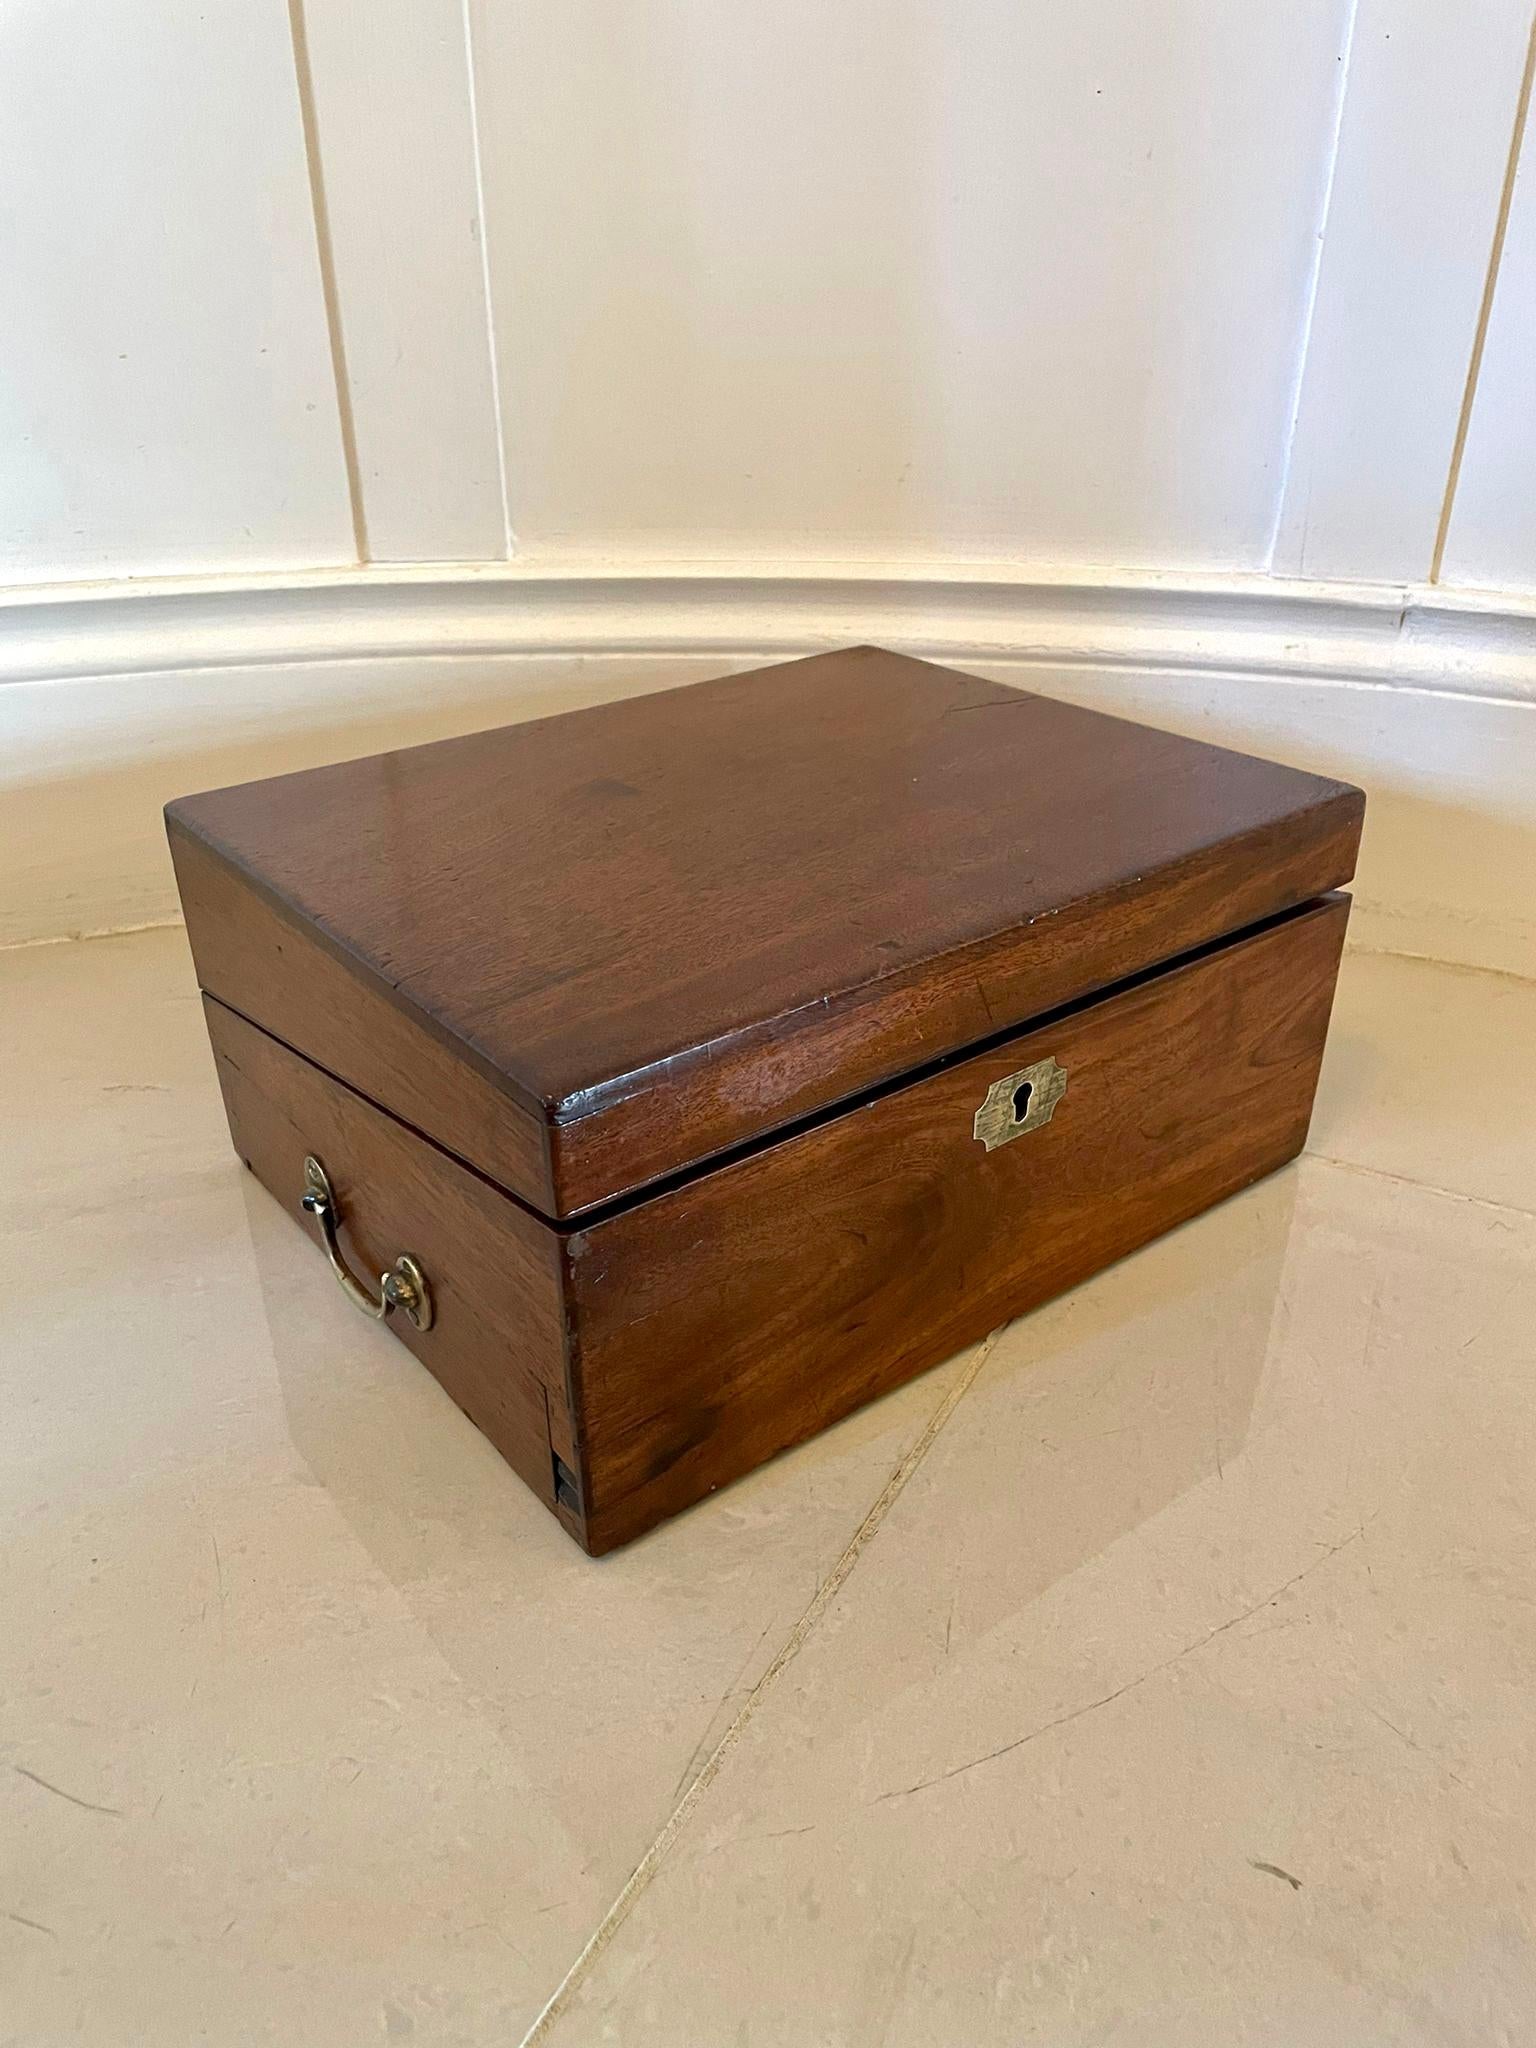 Quality antique George III mahogany wriing box having a drawer to the side with original brass handles, lift up top opening to reveal a leather writing surface and two storage compartments and original pen tray. 

In lovely original